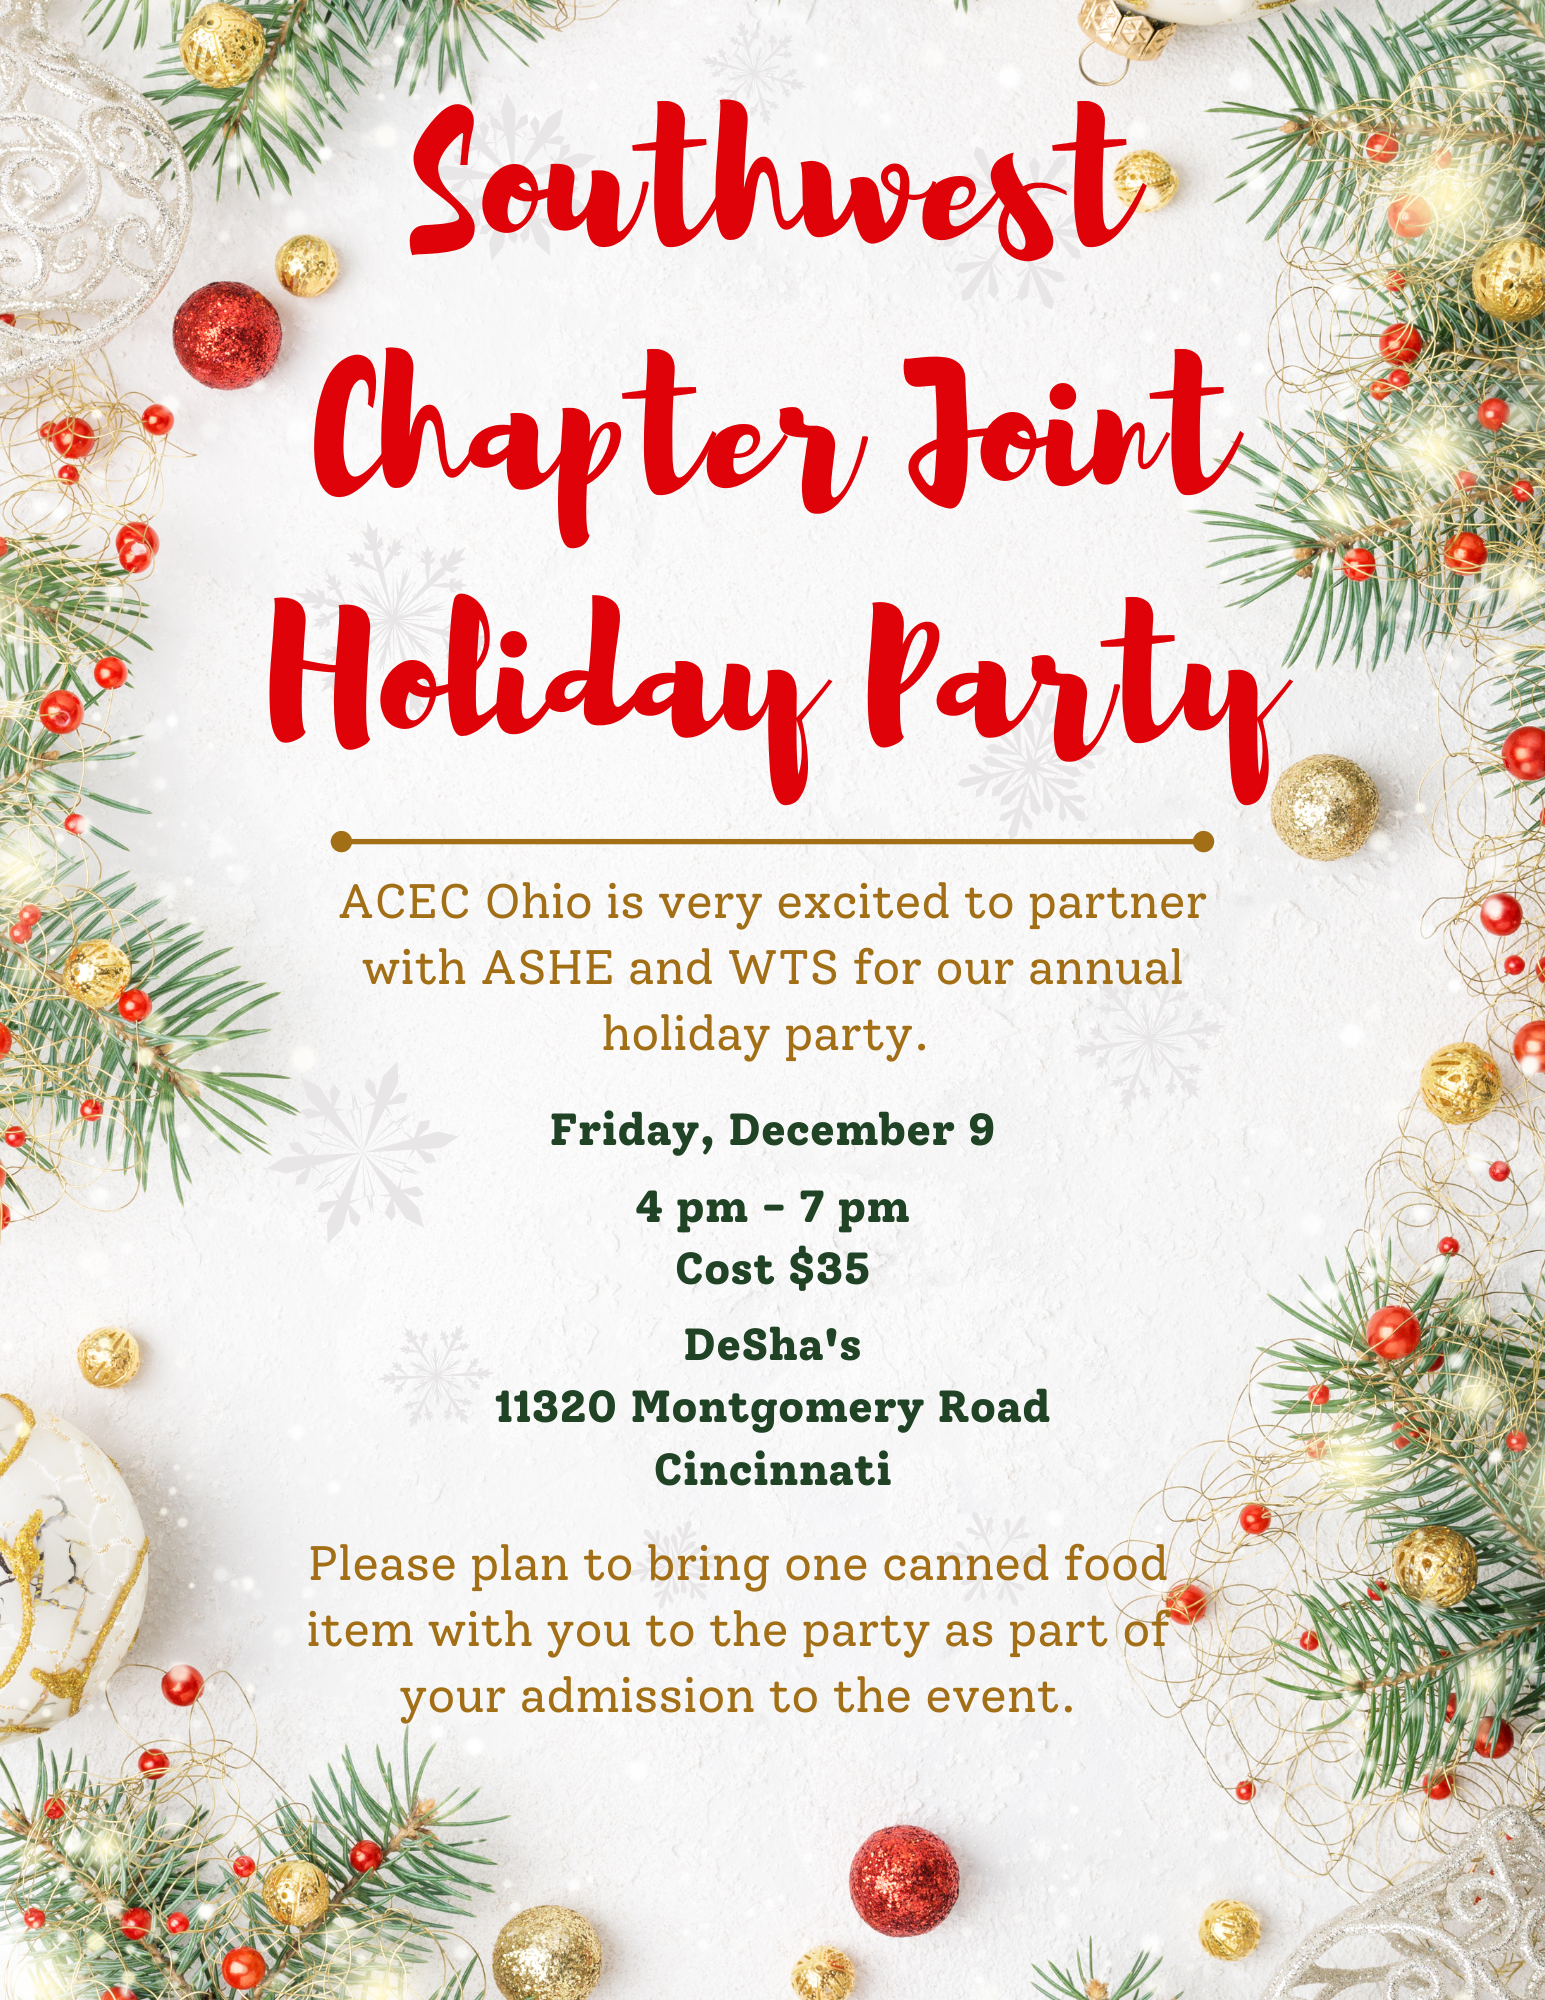 Southwest Chapter Joint Holiday Party